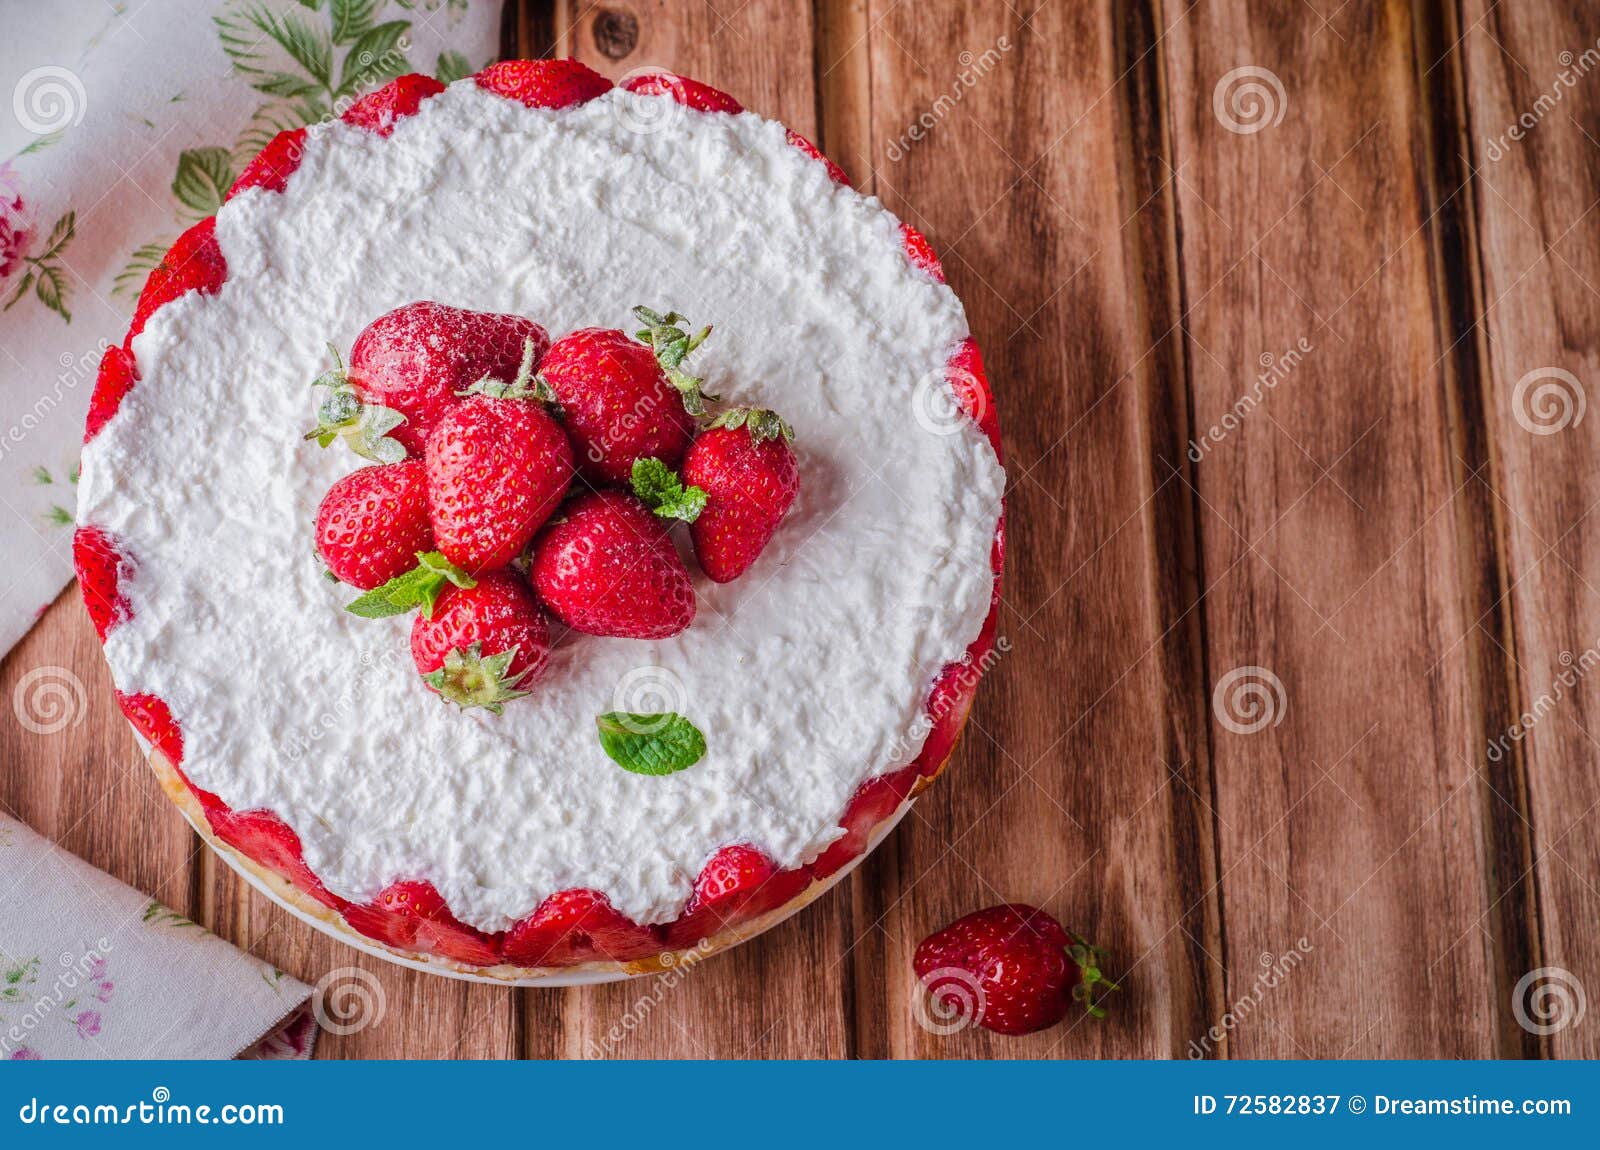 No Baked Strawberry Cheesecake With Cottage Cheese On Wooden